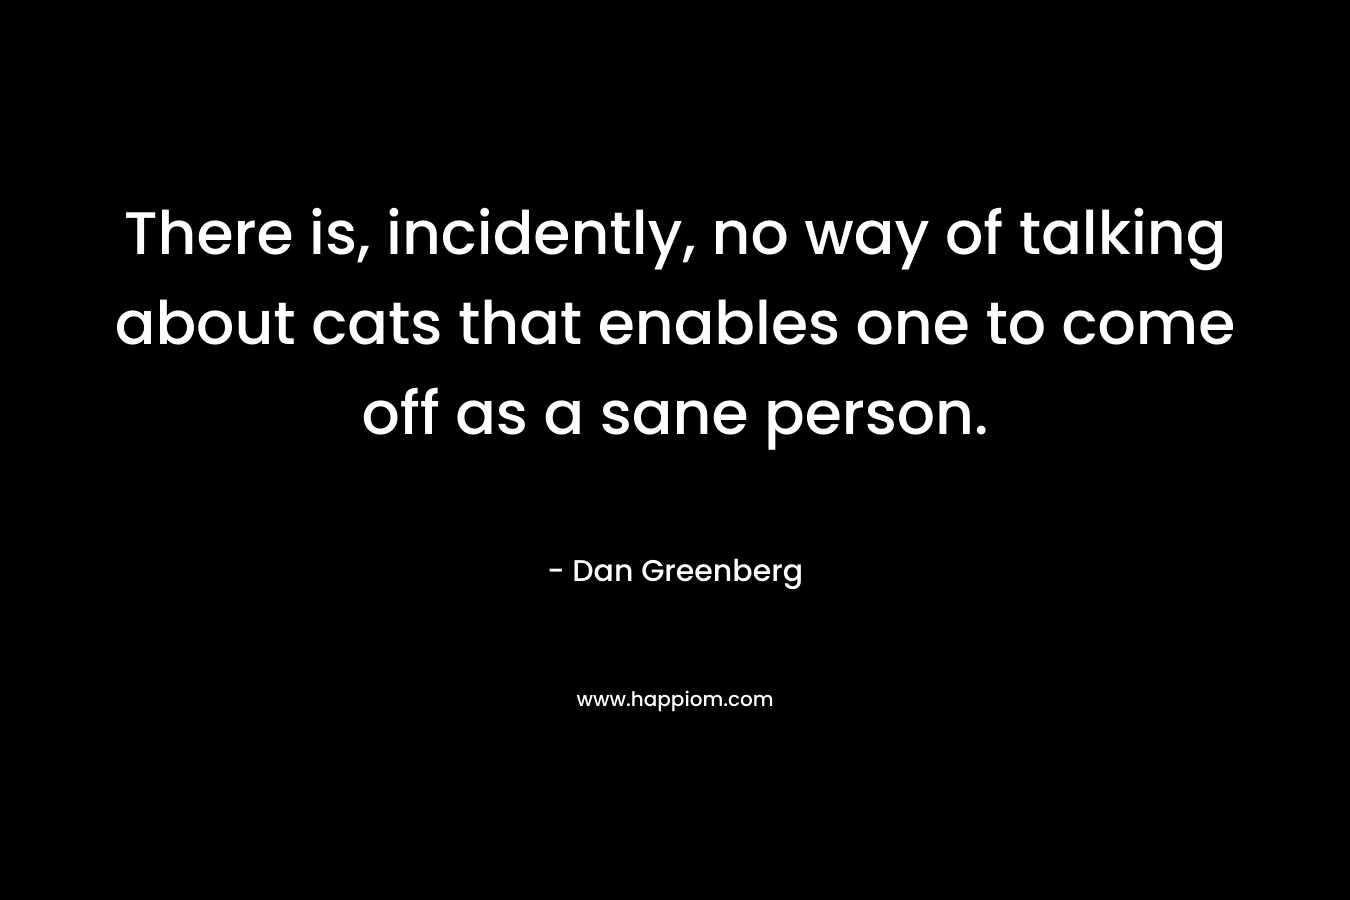 There is, incidently, no way of talking about cats that enables one to come off as a sane person.